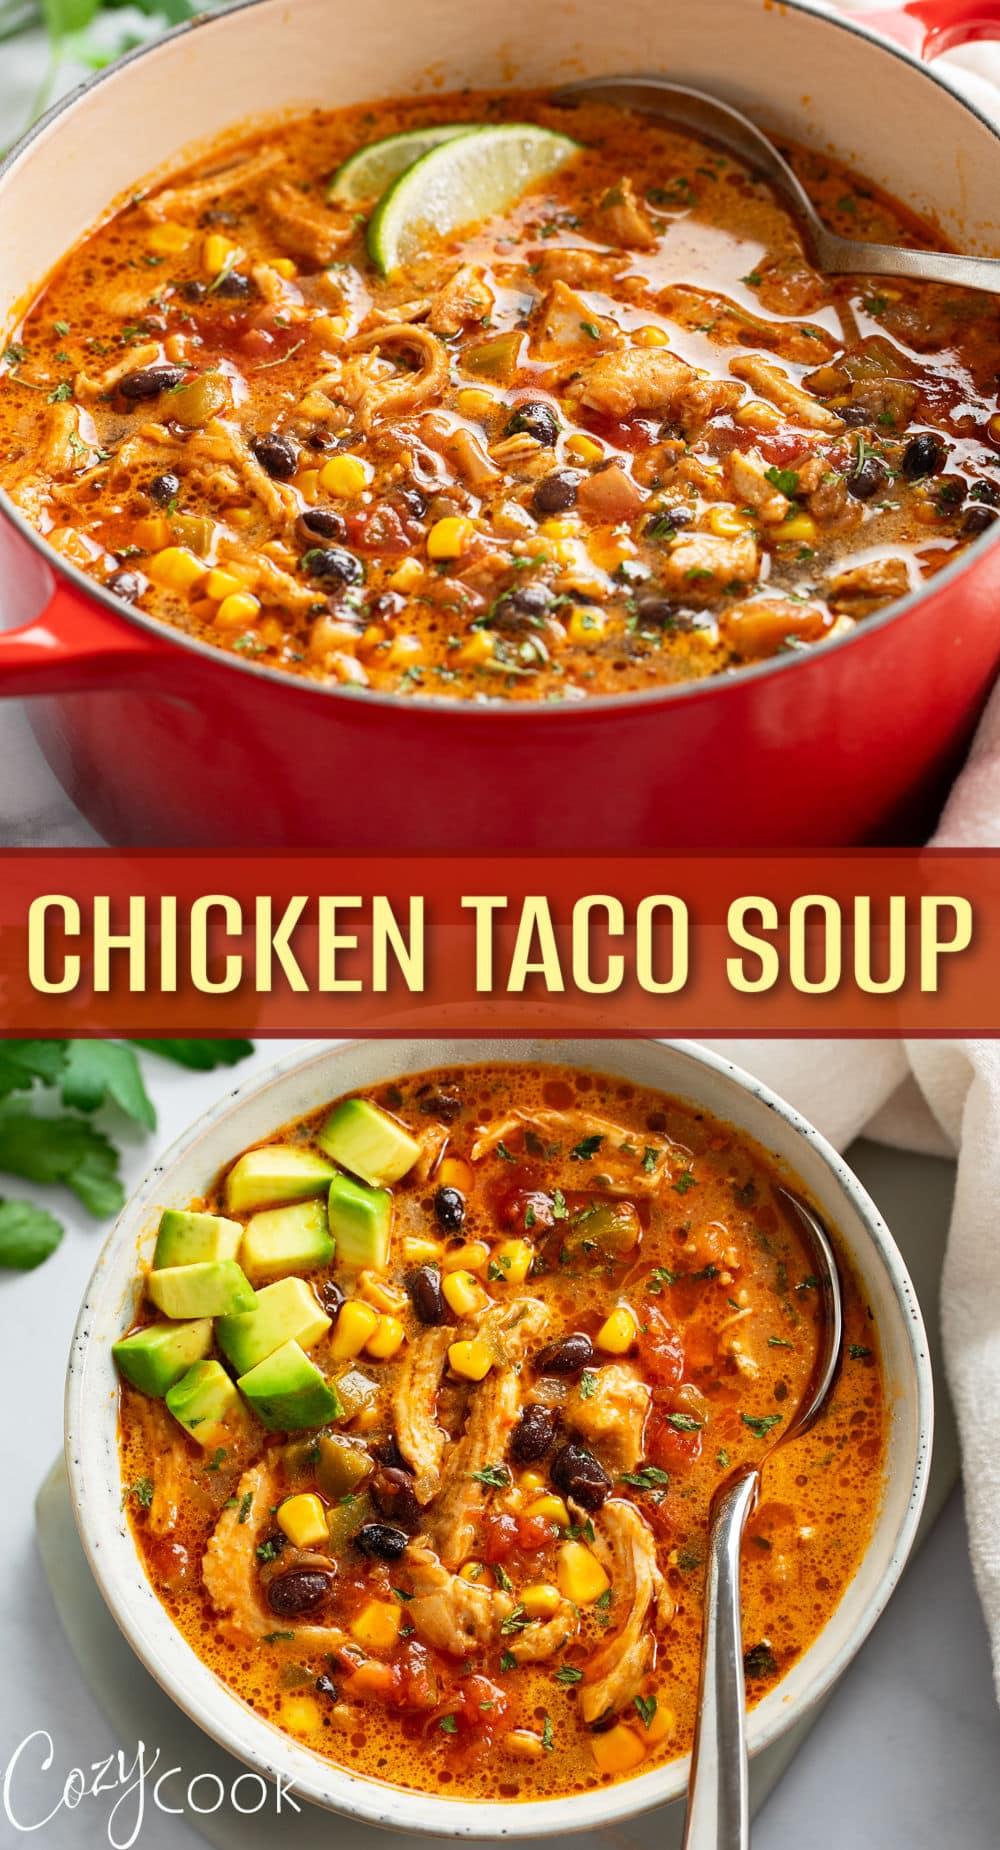 Chicken Taco Soup - The Cozy Cook